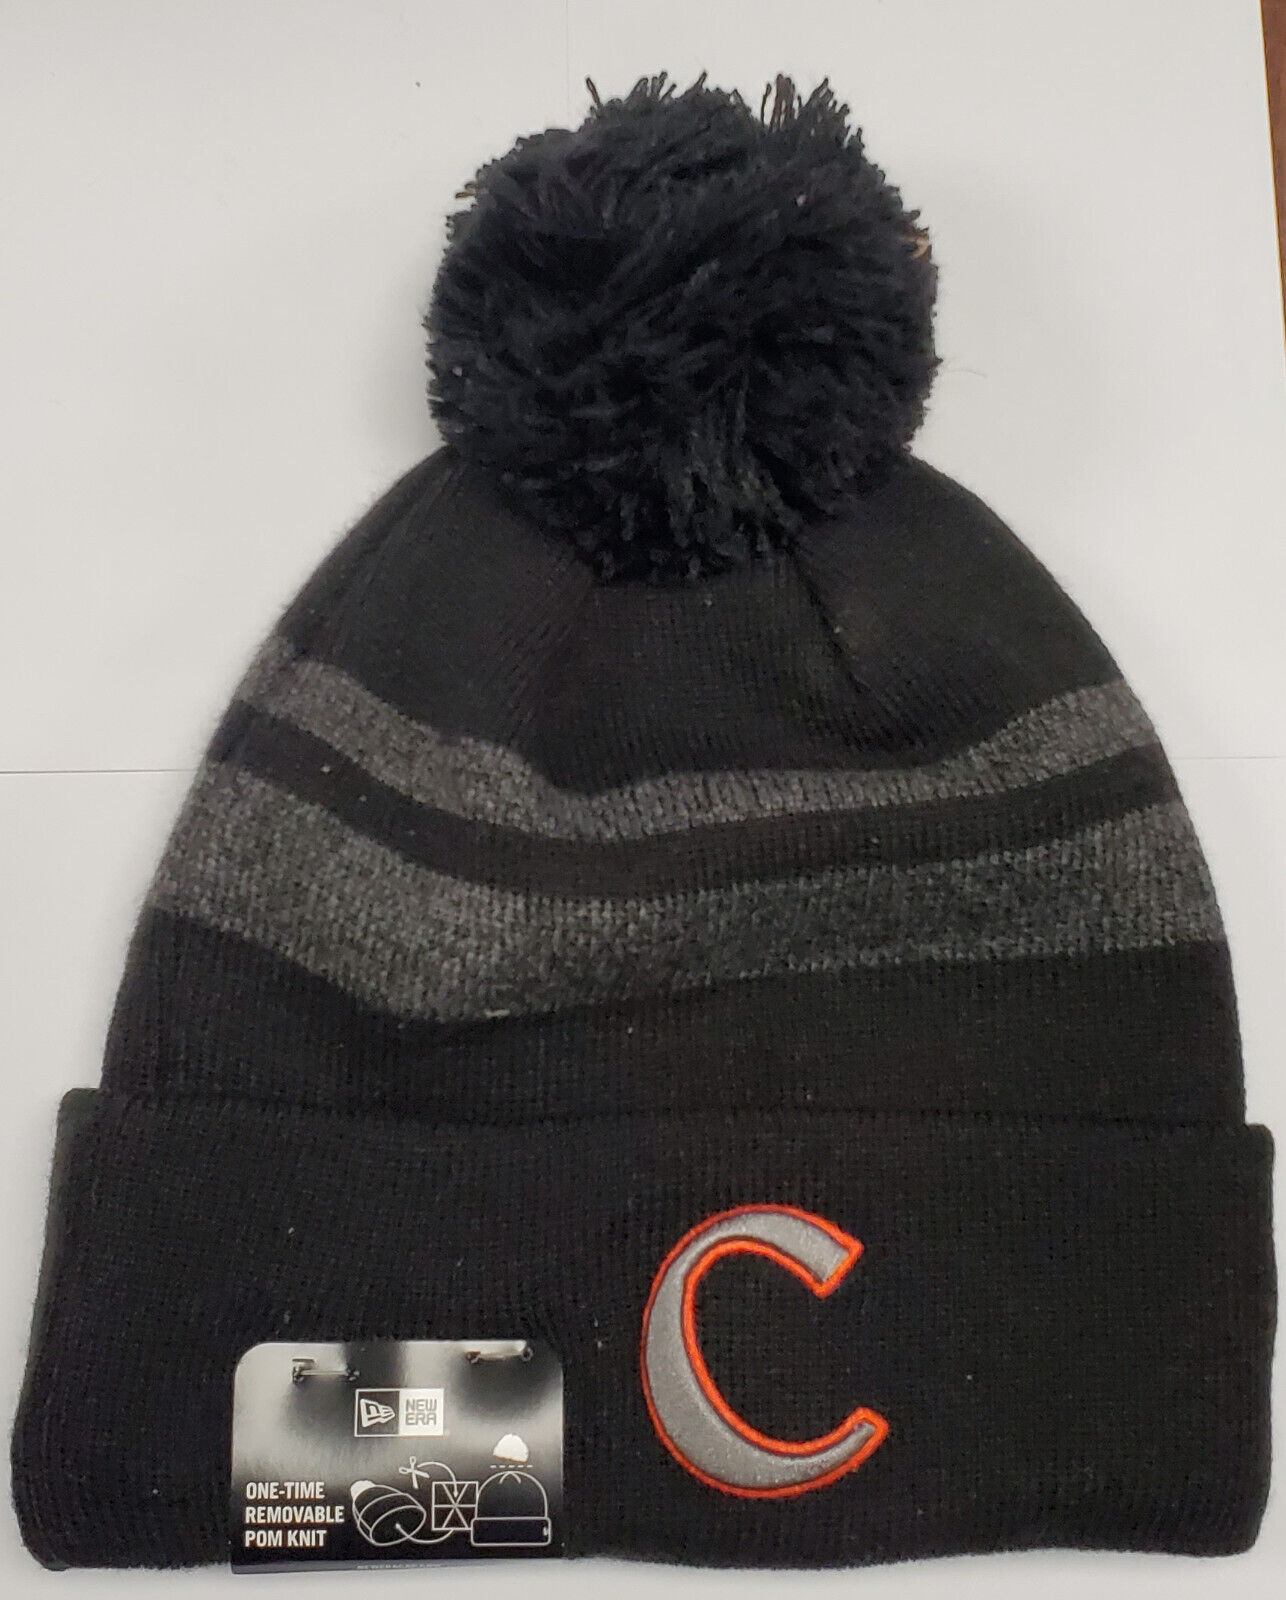 Primary image for Clemson Tigers New Era Dispatch Cuffed Knit Stocking Cap - NCAA